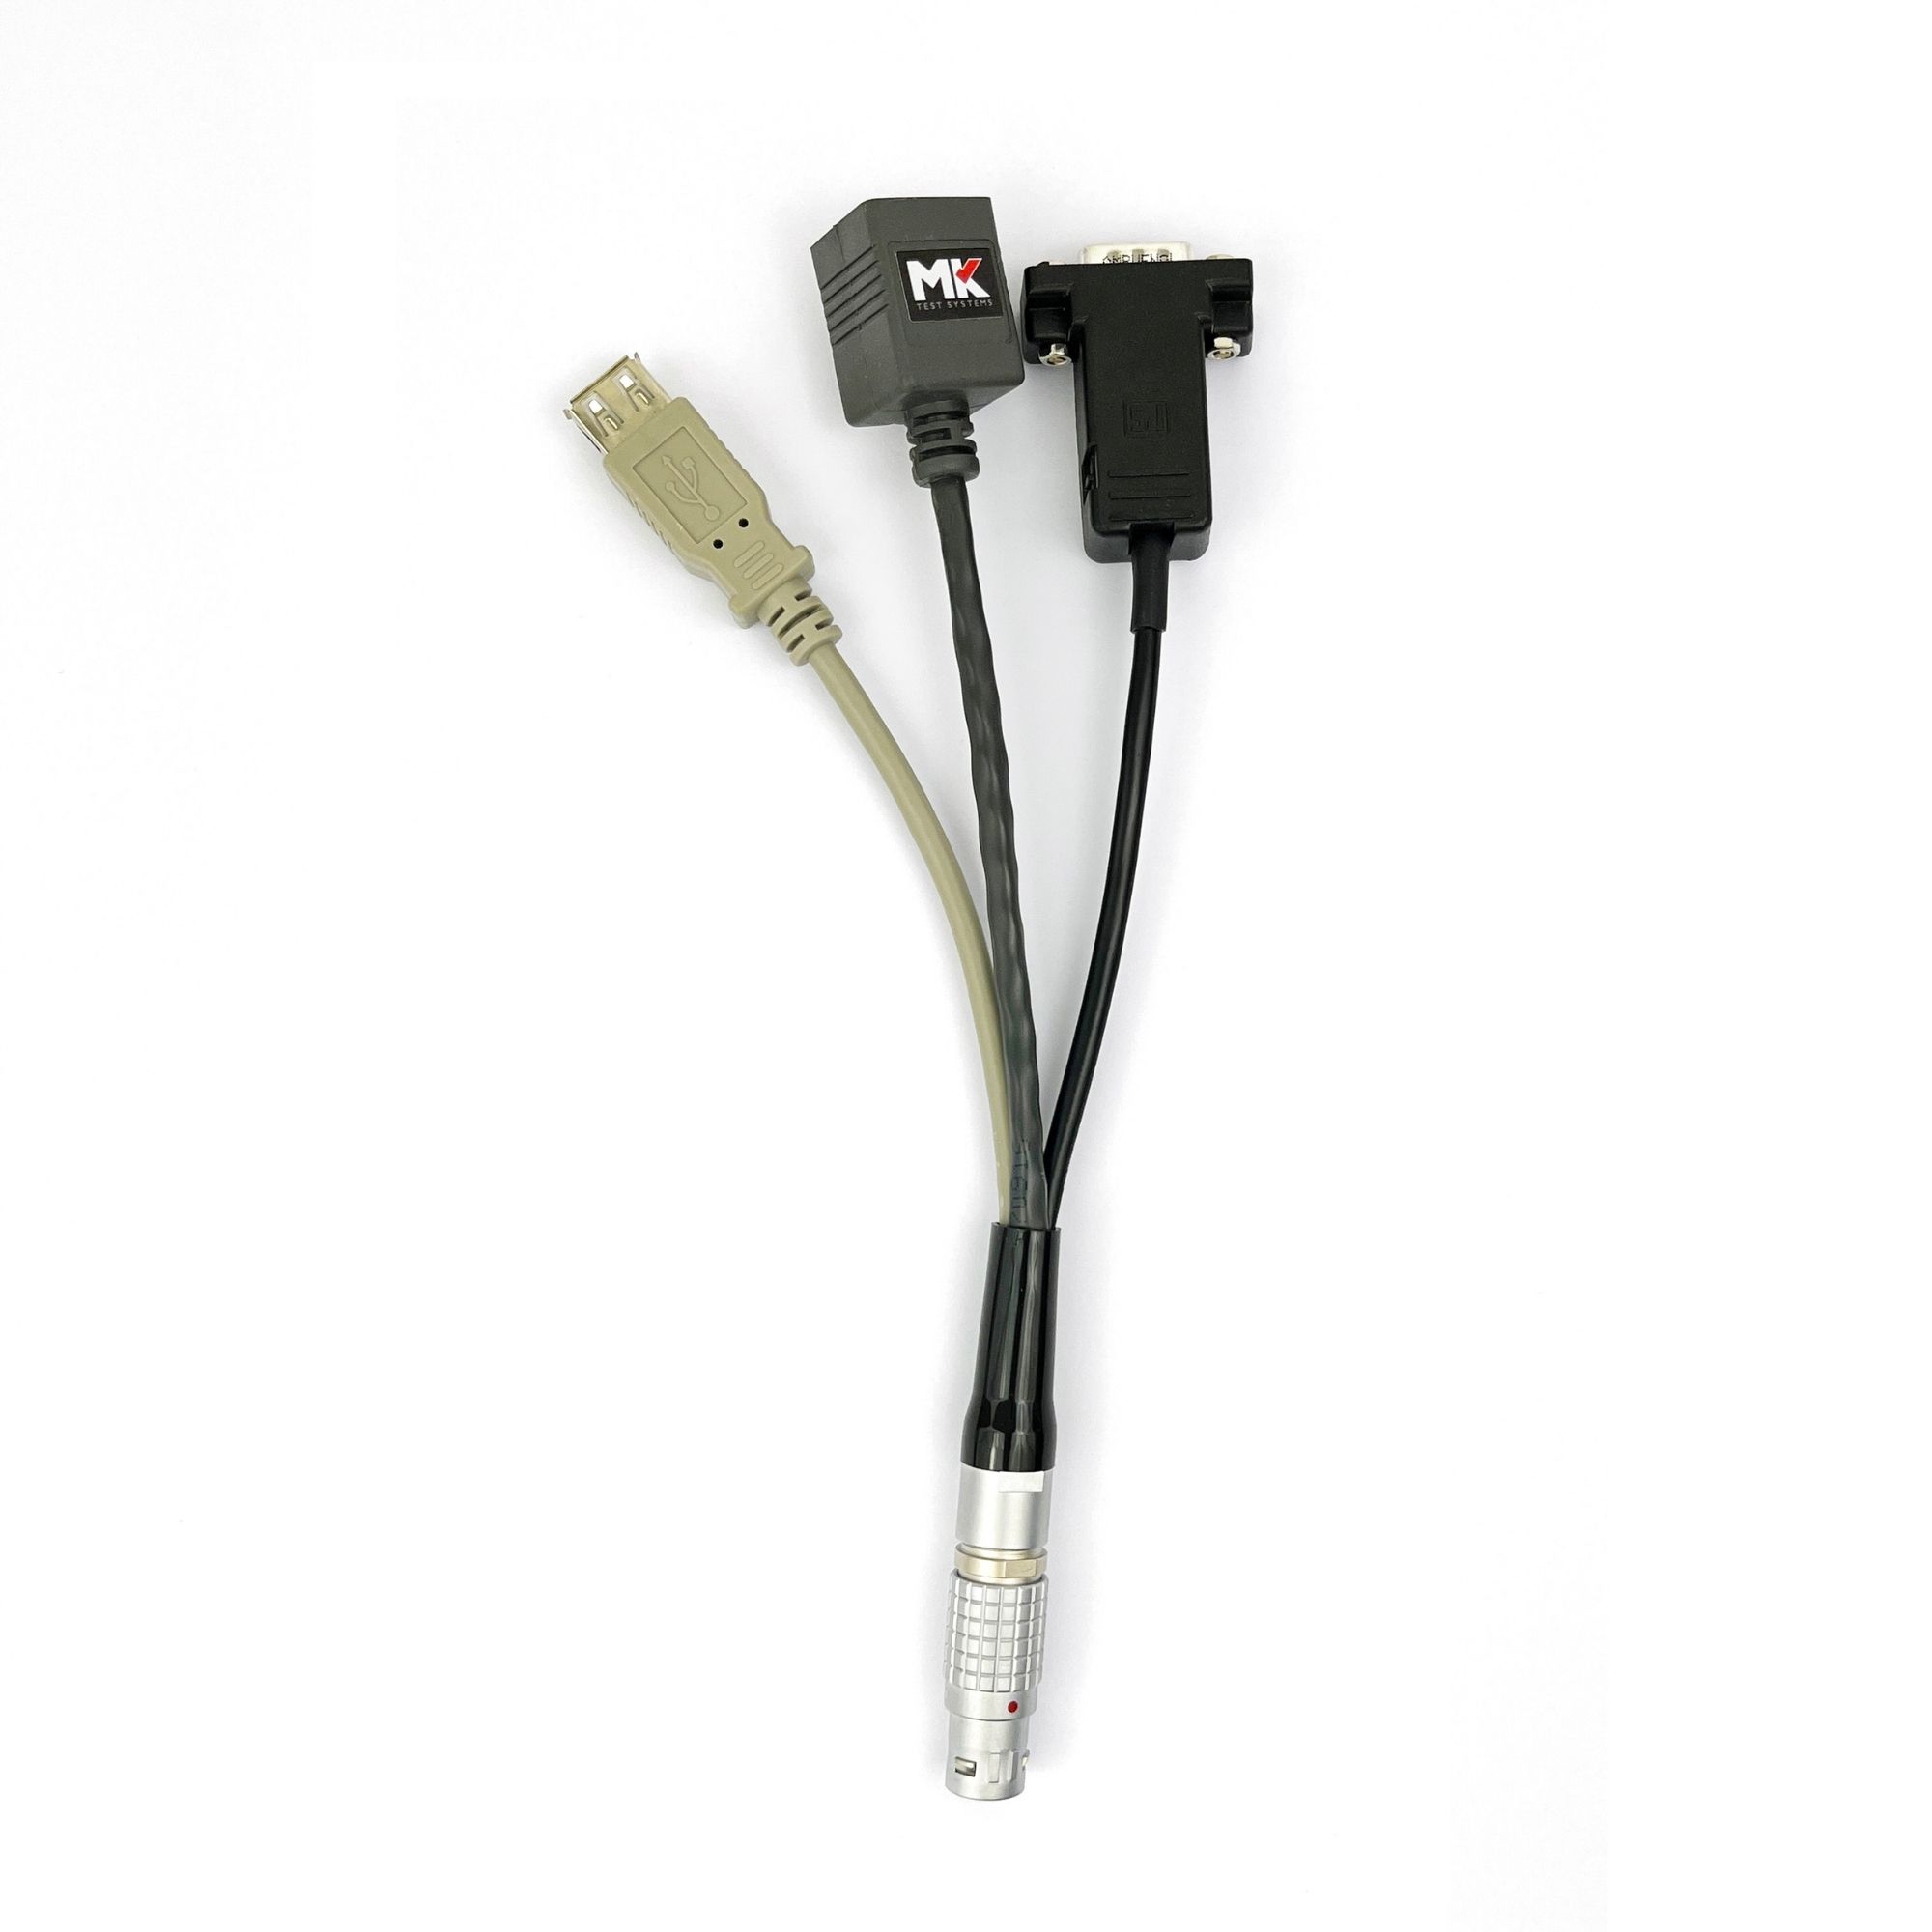 2.10 Accessories - Data adaptor cable (002)